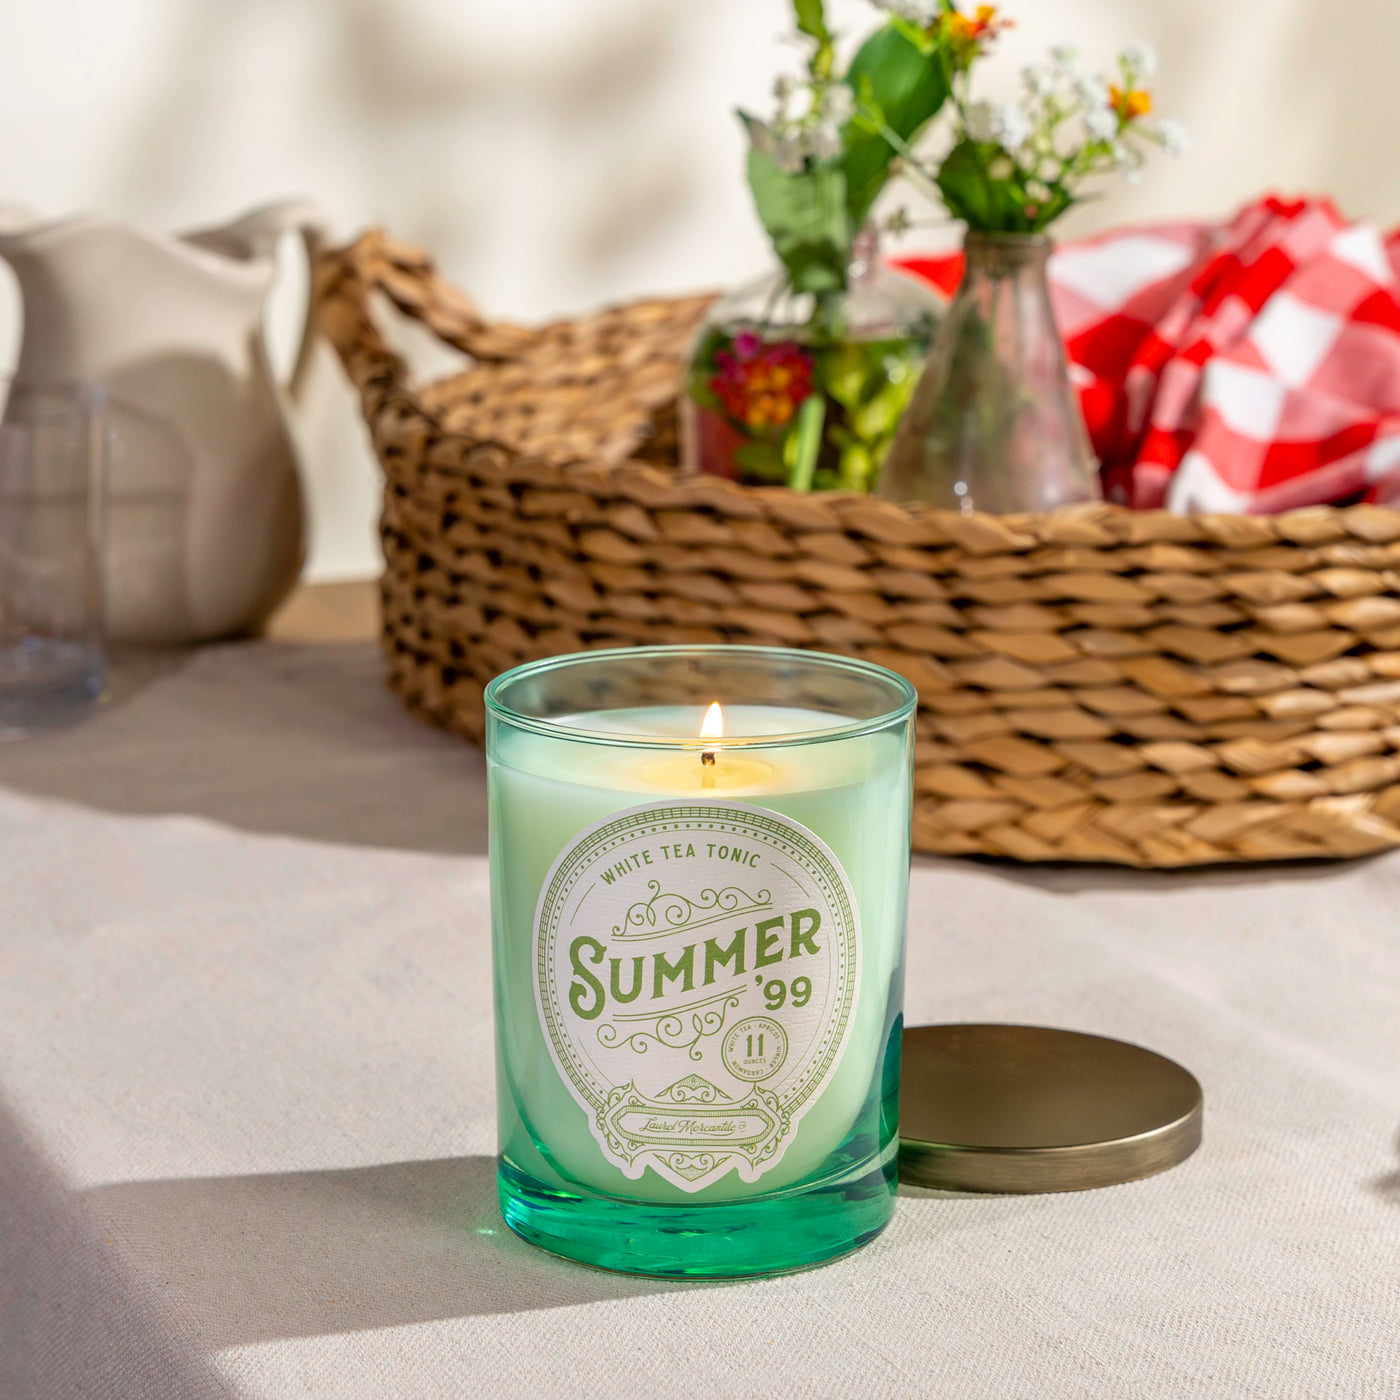 Summer 99 11 ounce candle